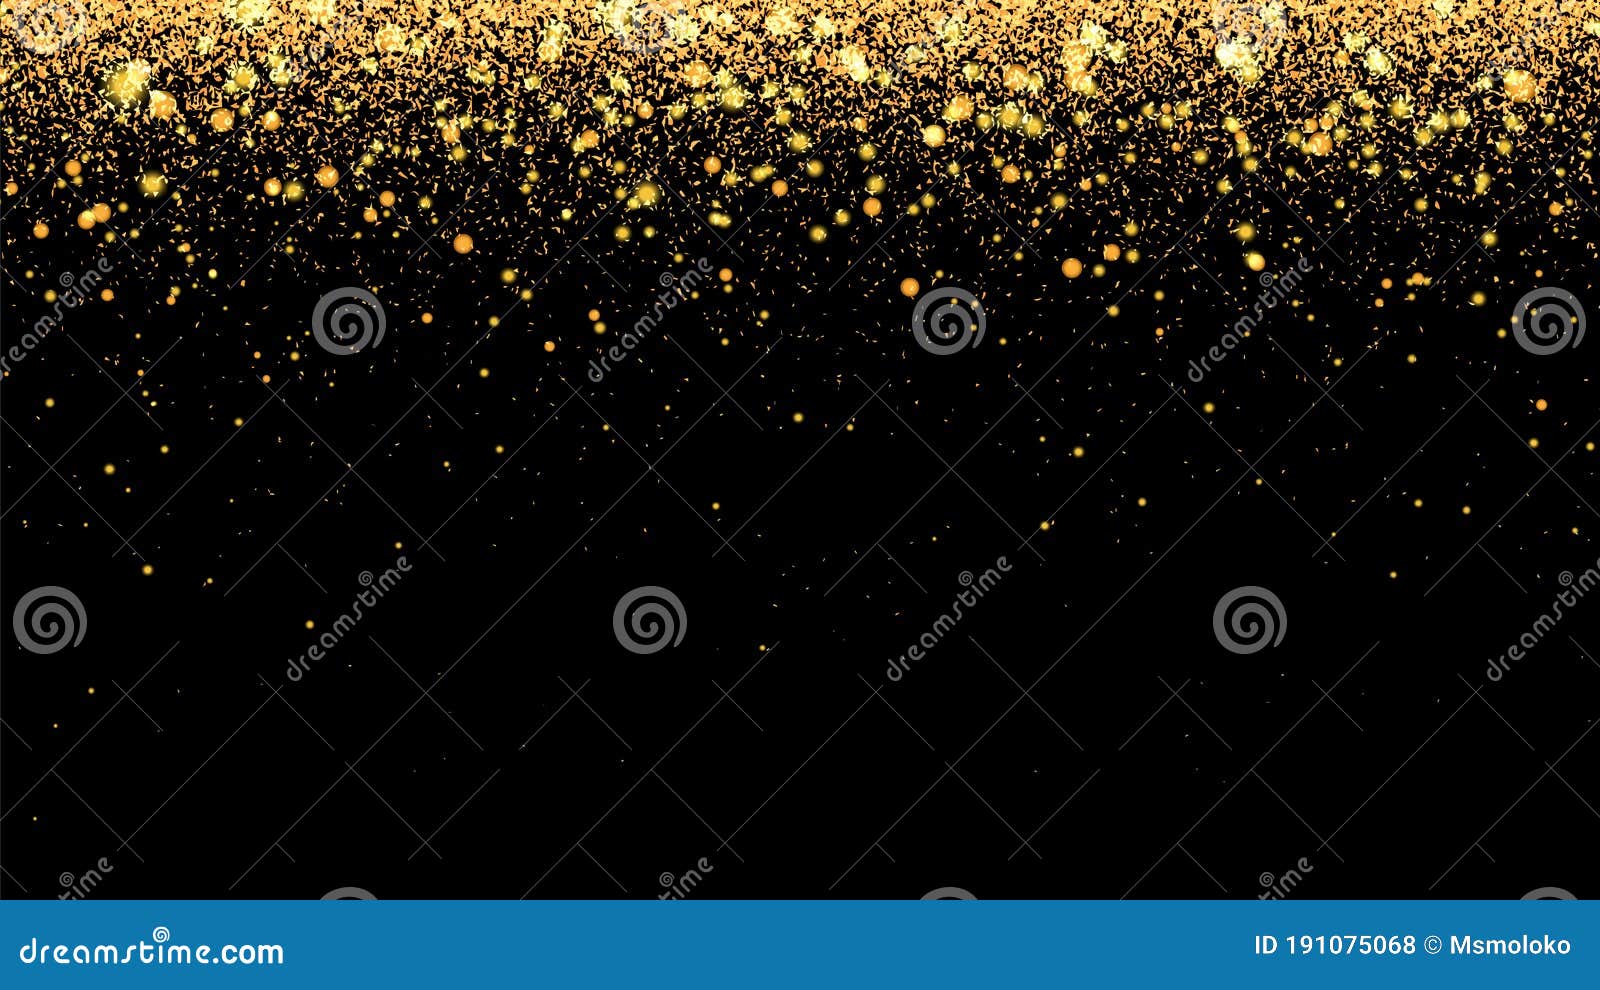 festive  background with gold glitter and confetti for christmas celebration. black background with glowing golden